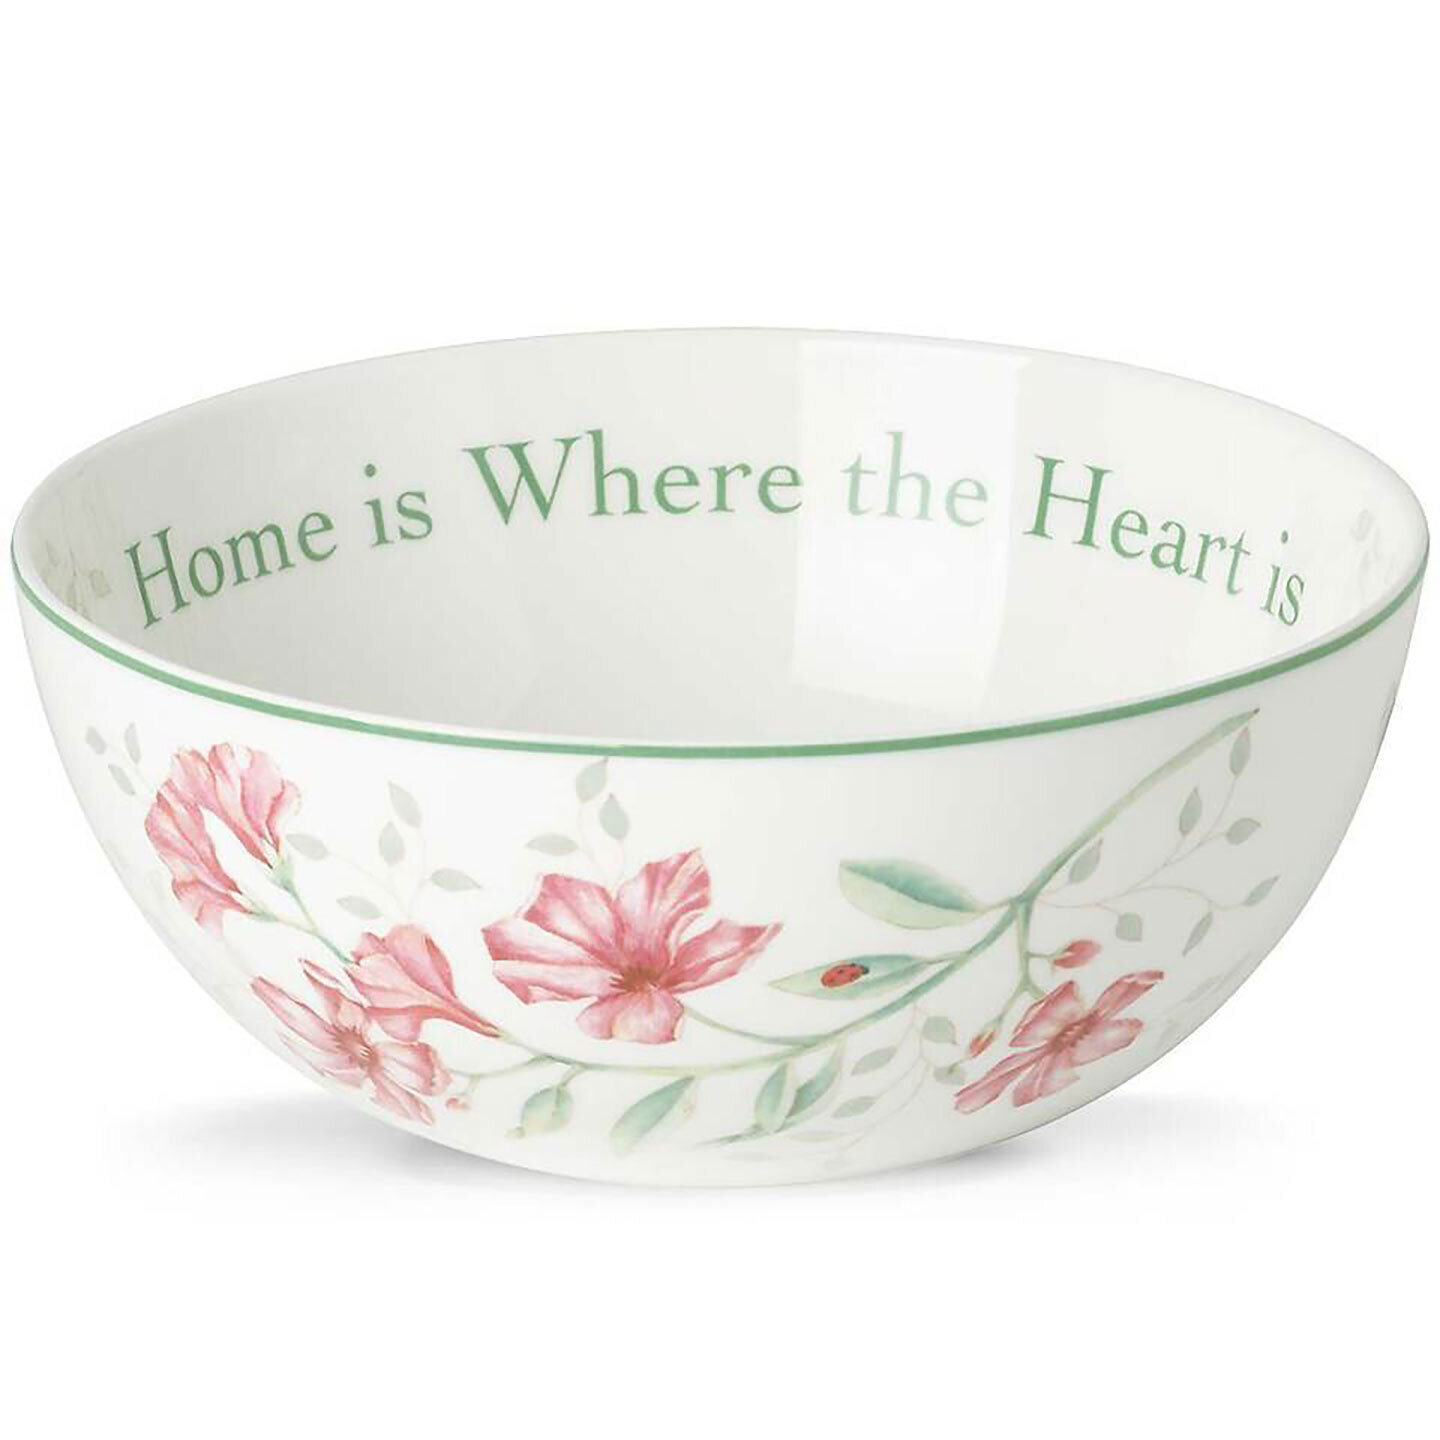 Lenox Butterfly Meadow Sentiment BowlÒHome is Where the Heart isÓ 806740